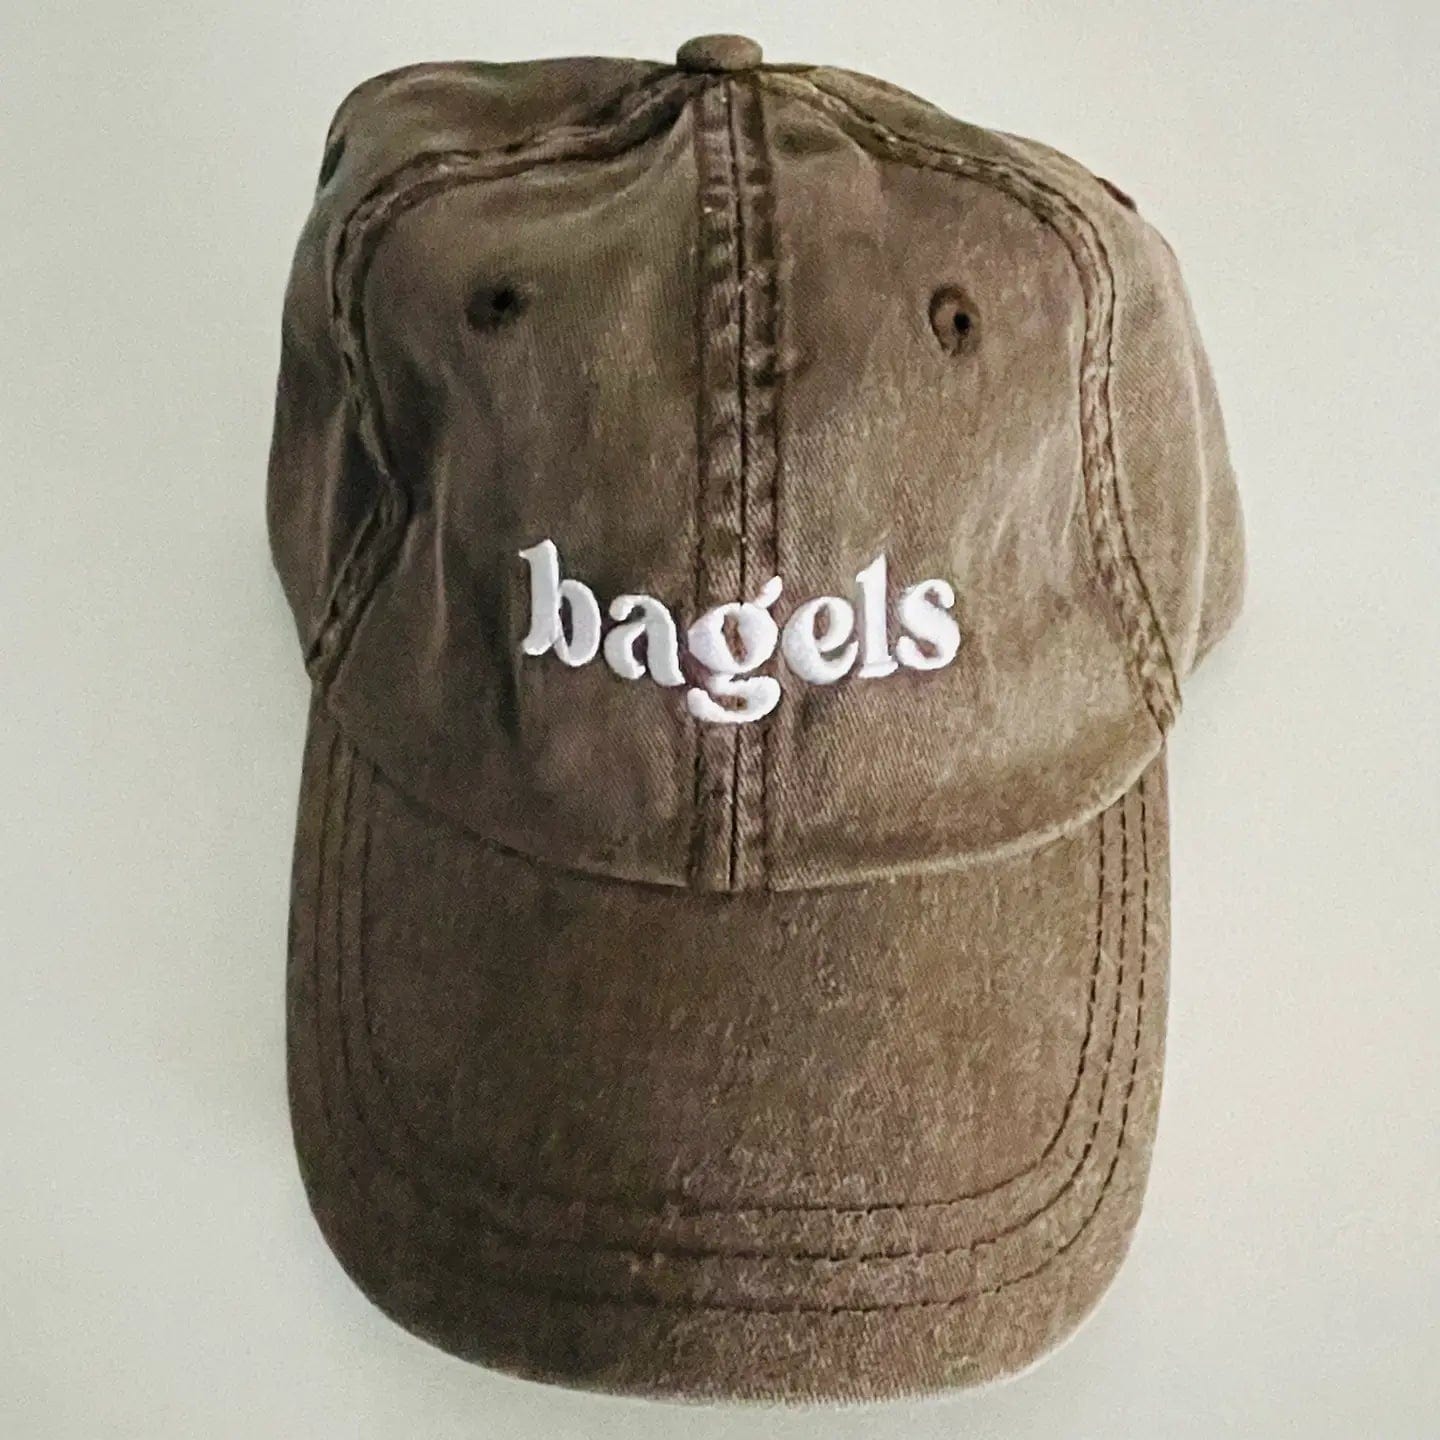 The Silver Spider Hats Unisex Bagels Baseball Cap - Brown